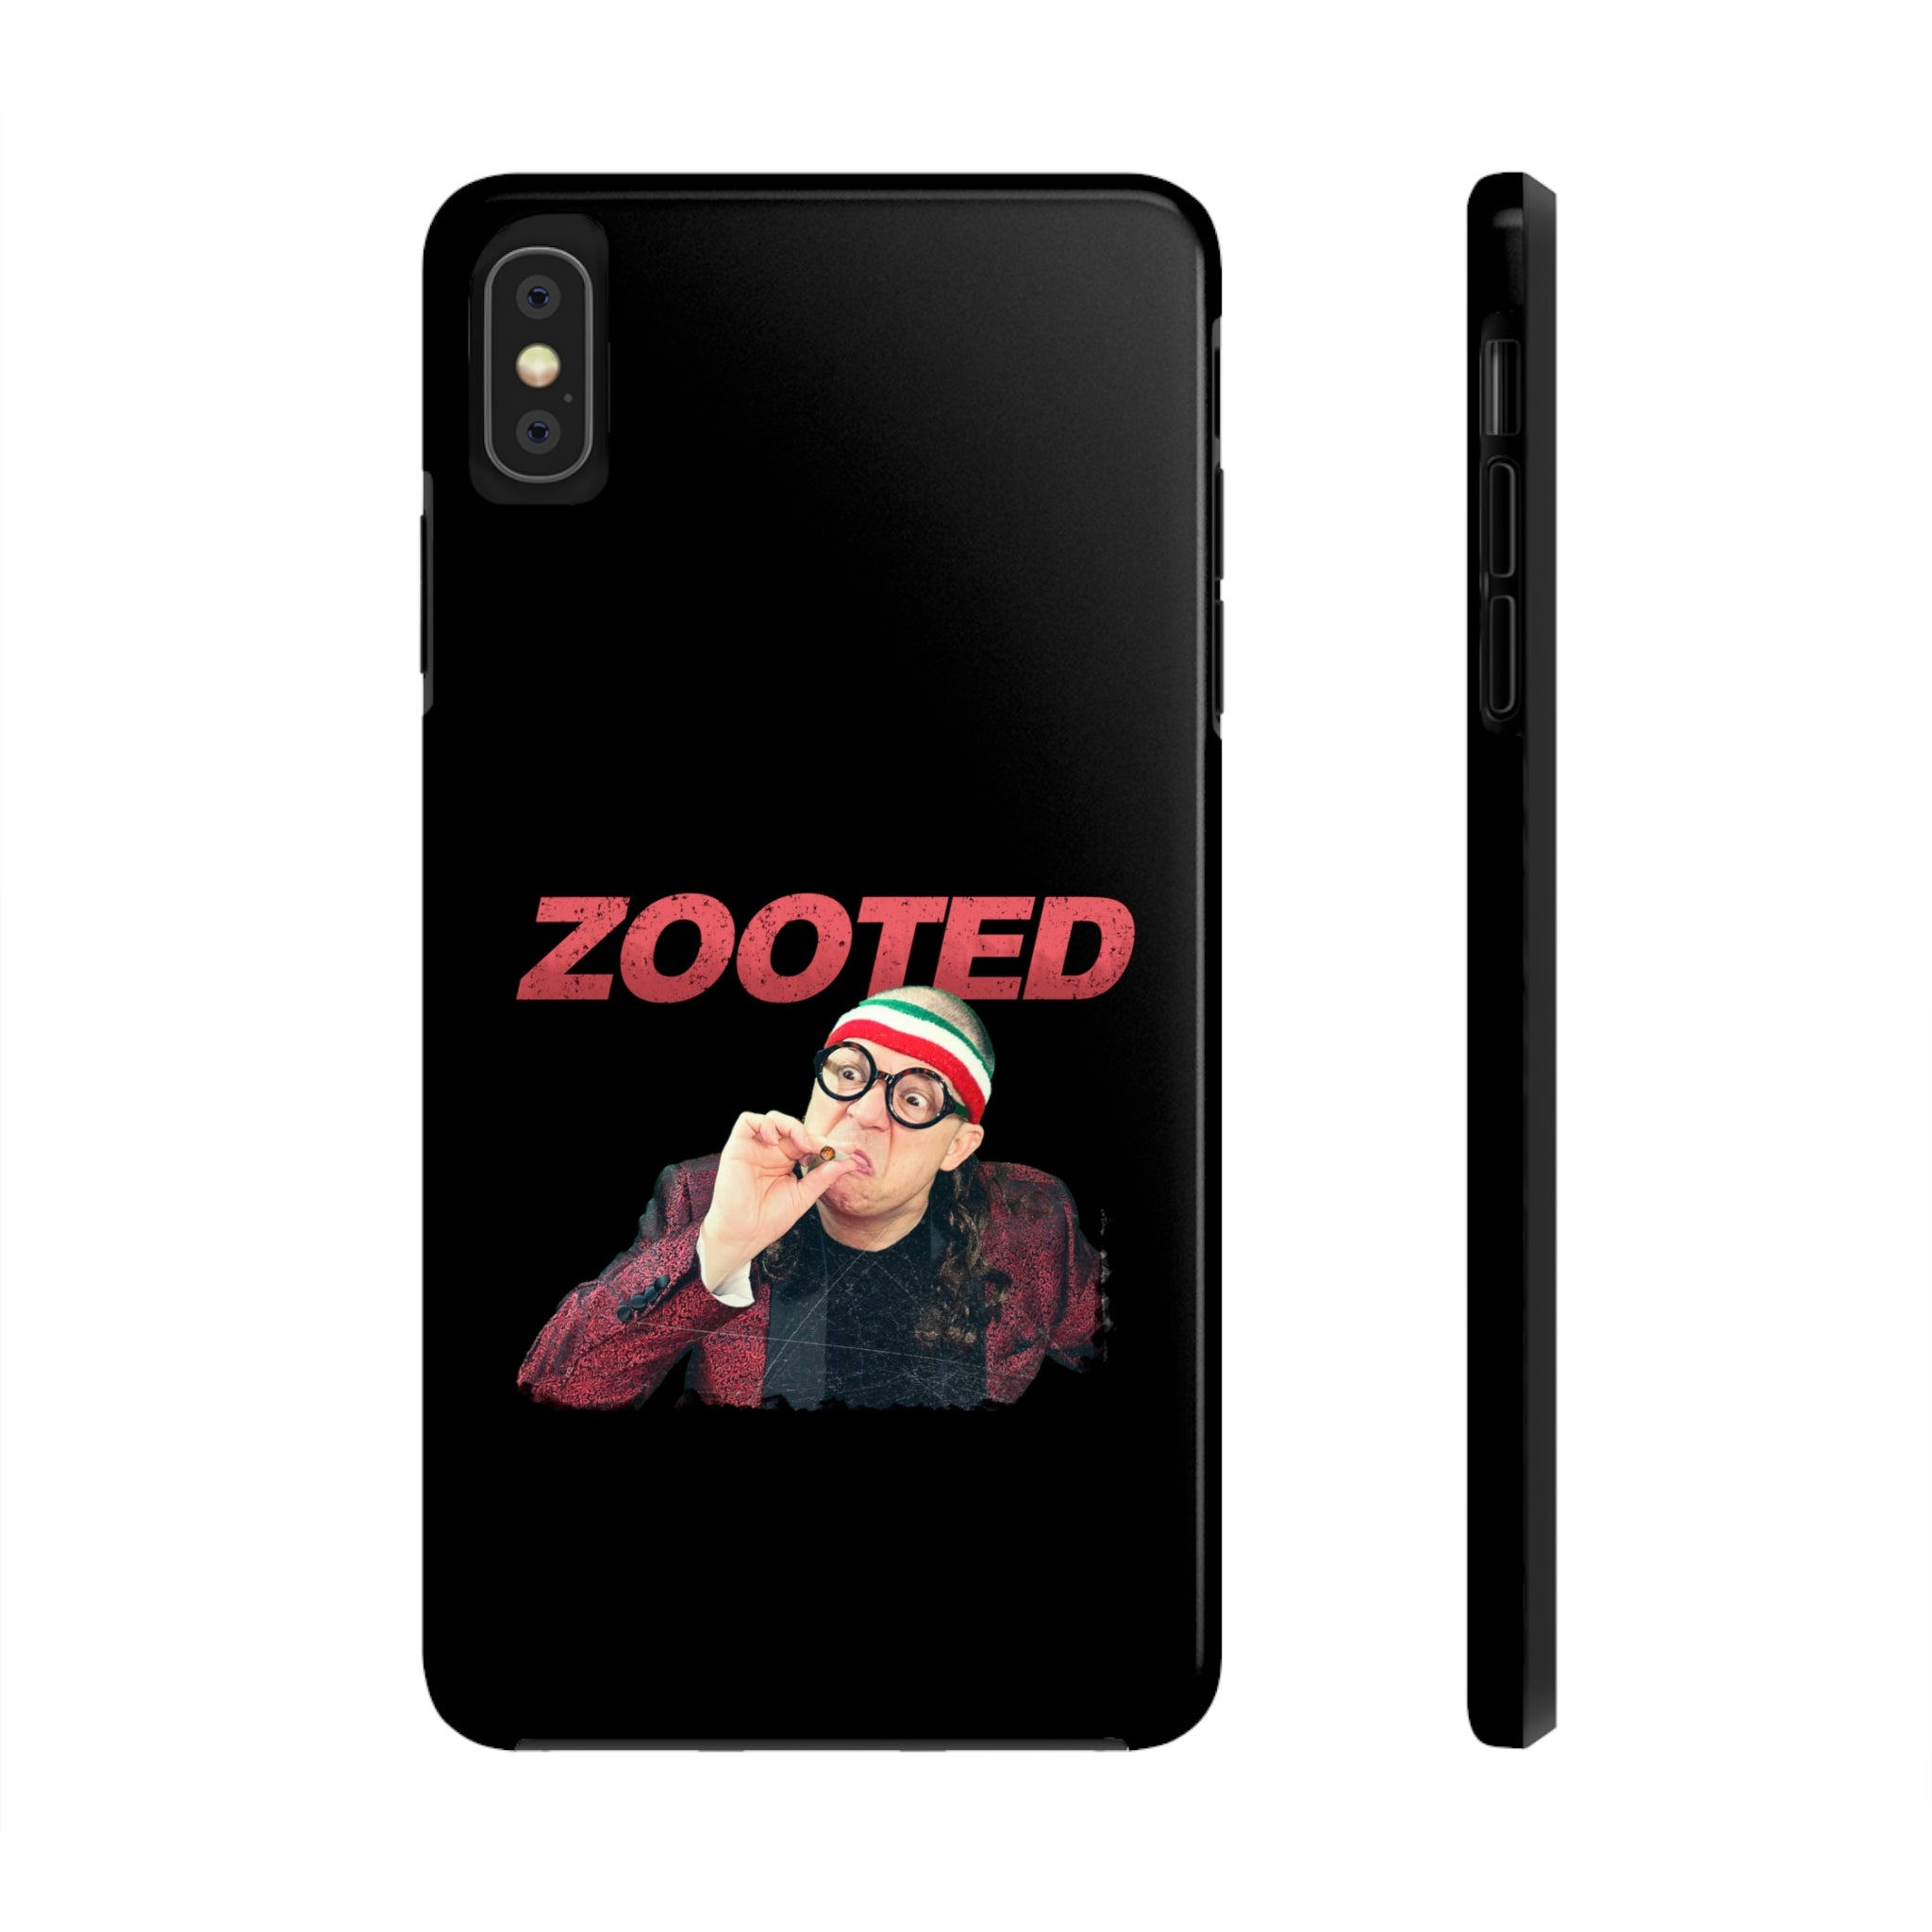 ZOOTED BLACK Tough Phone Cases